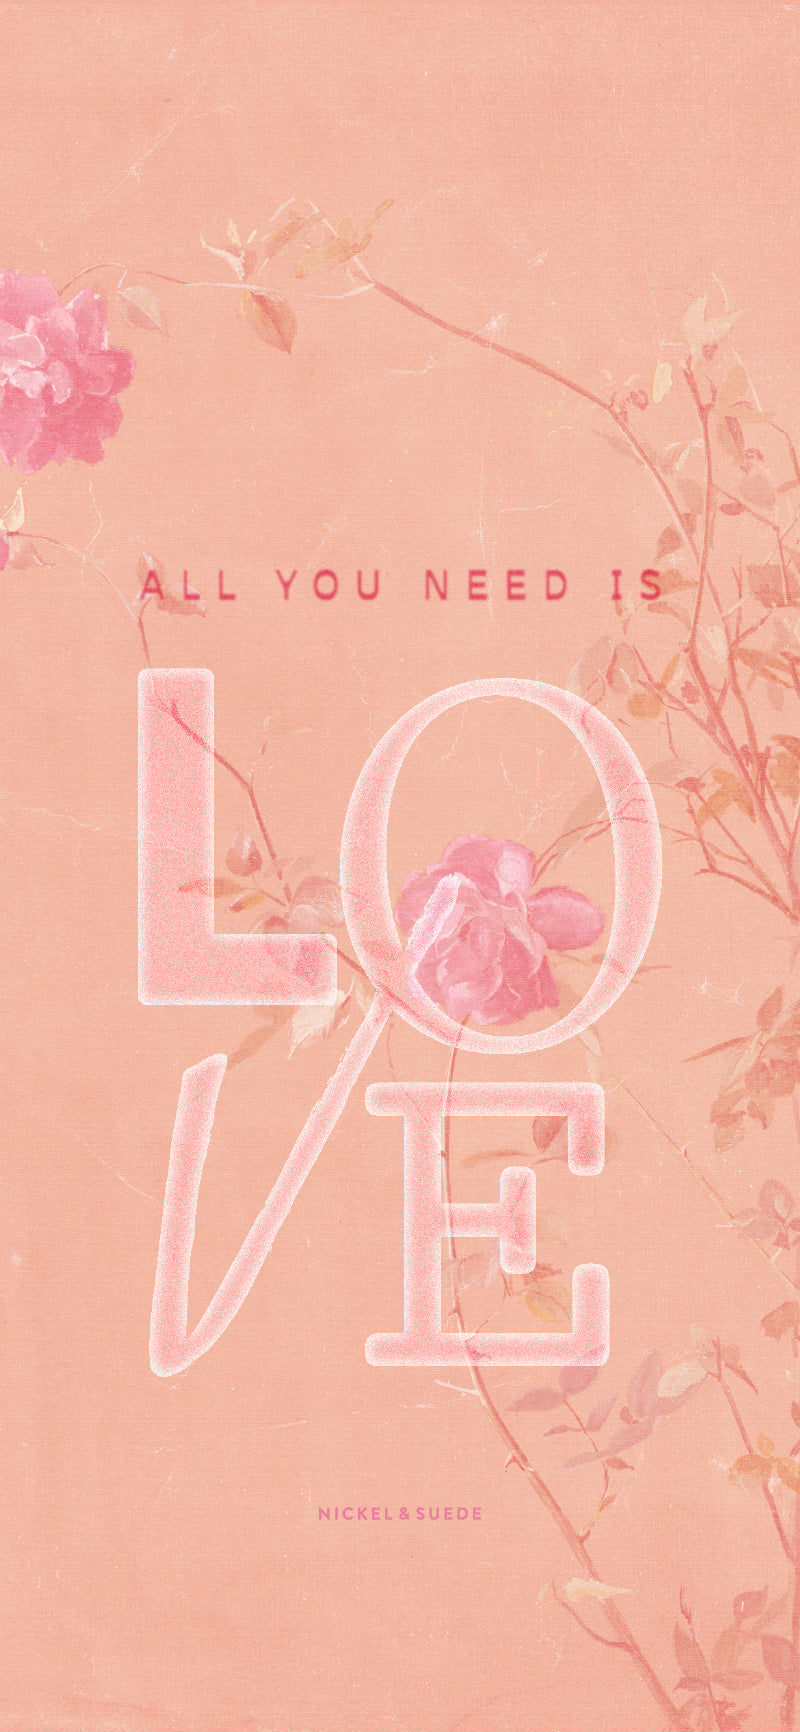 All you need is love Wallpaper